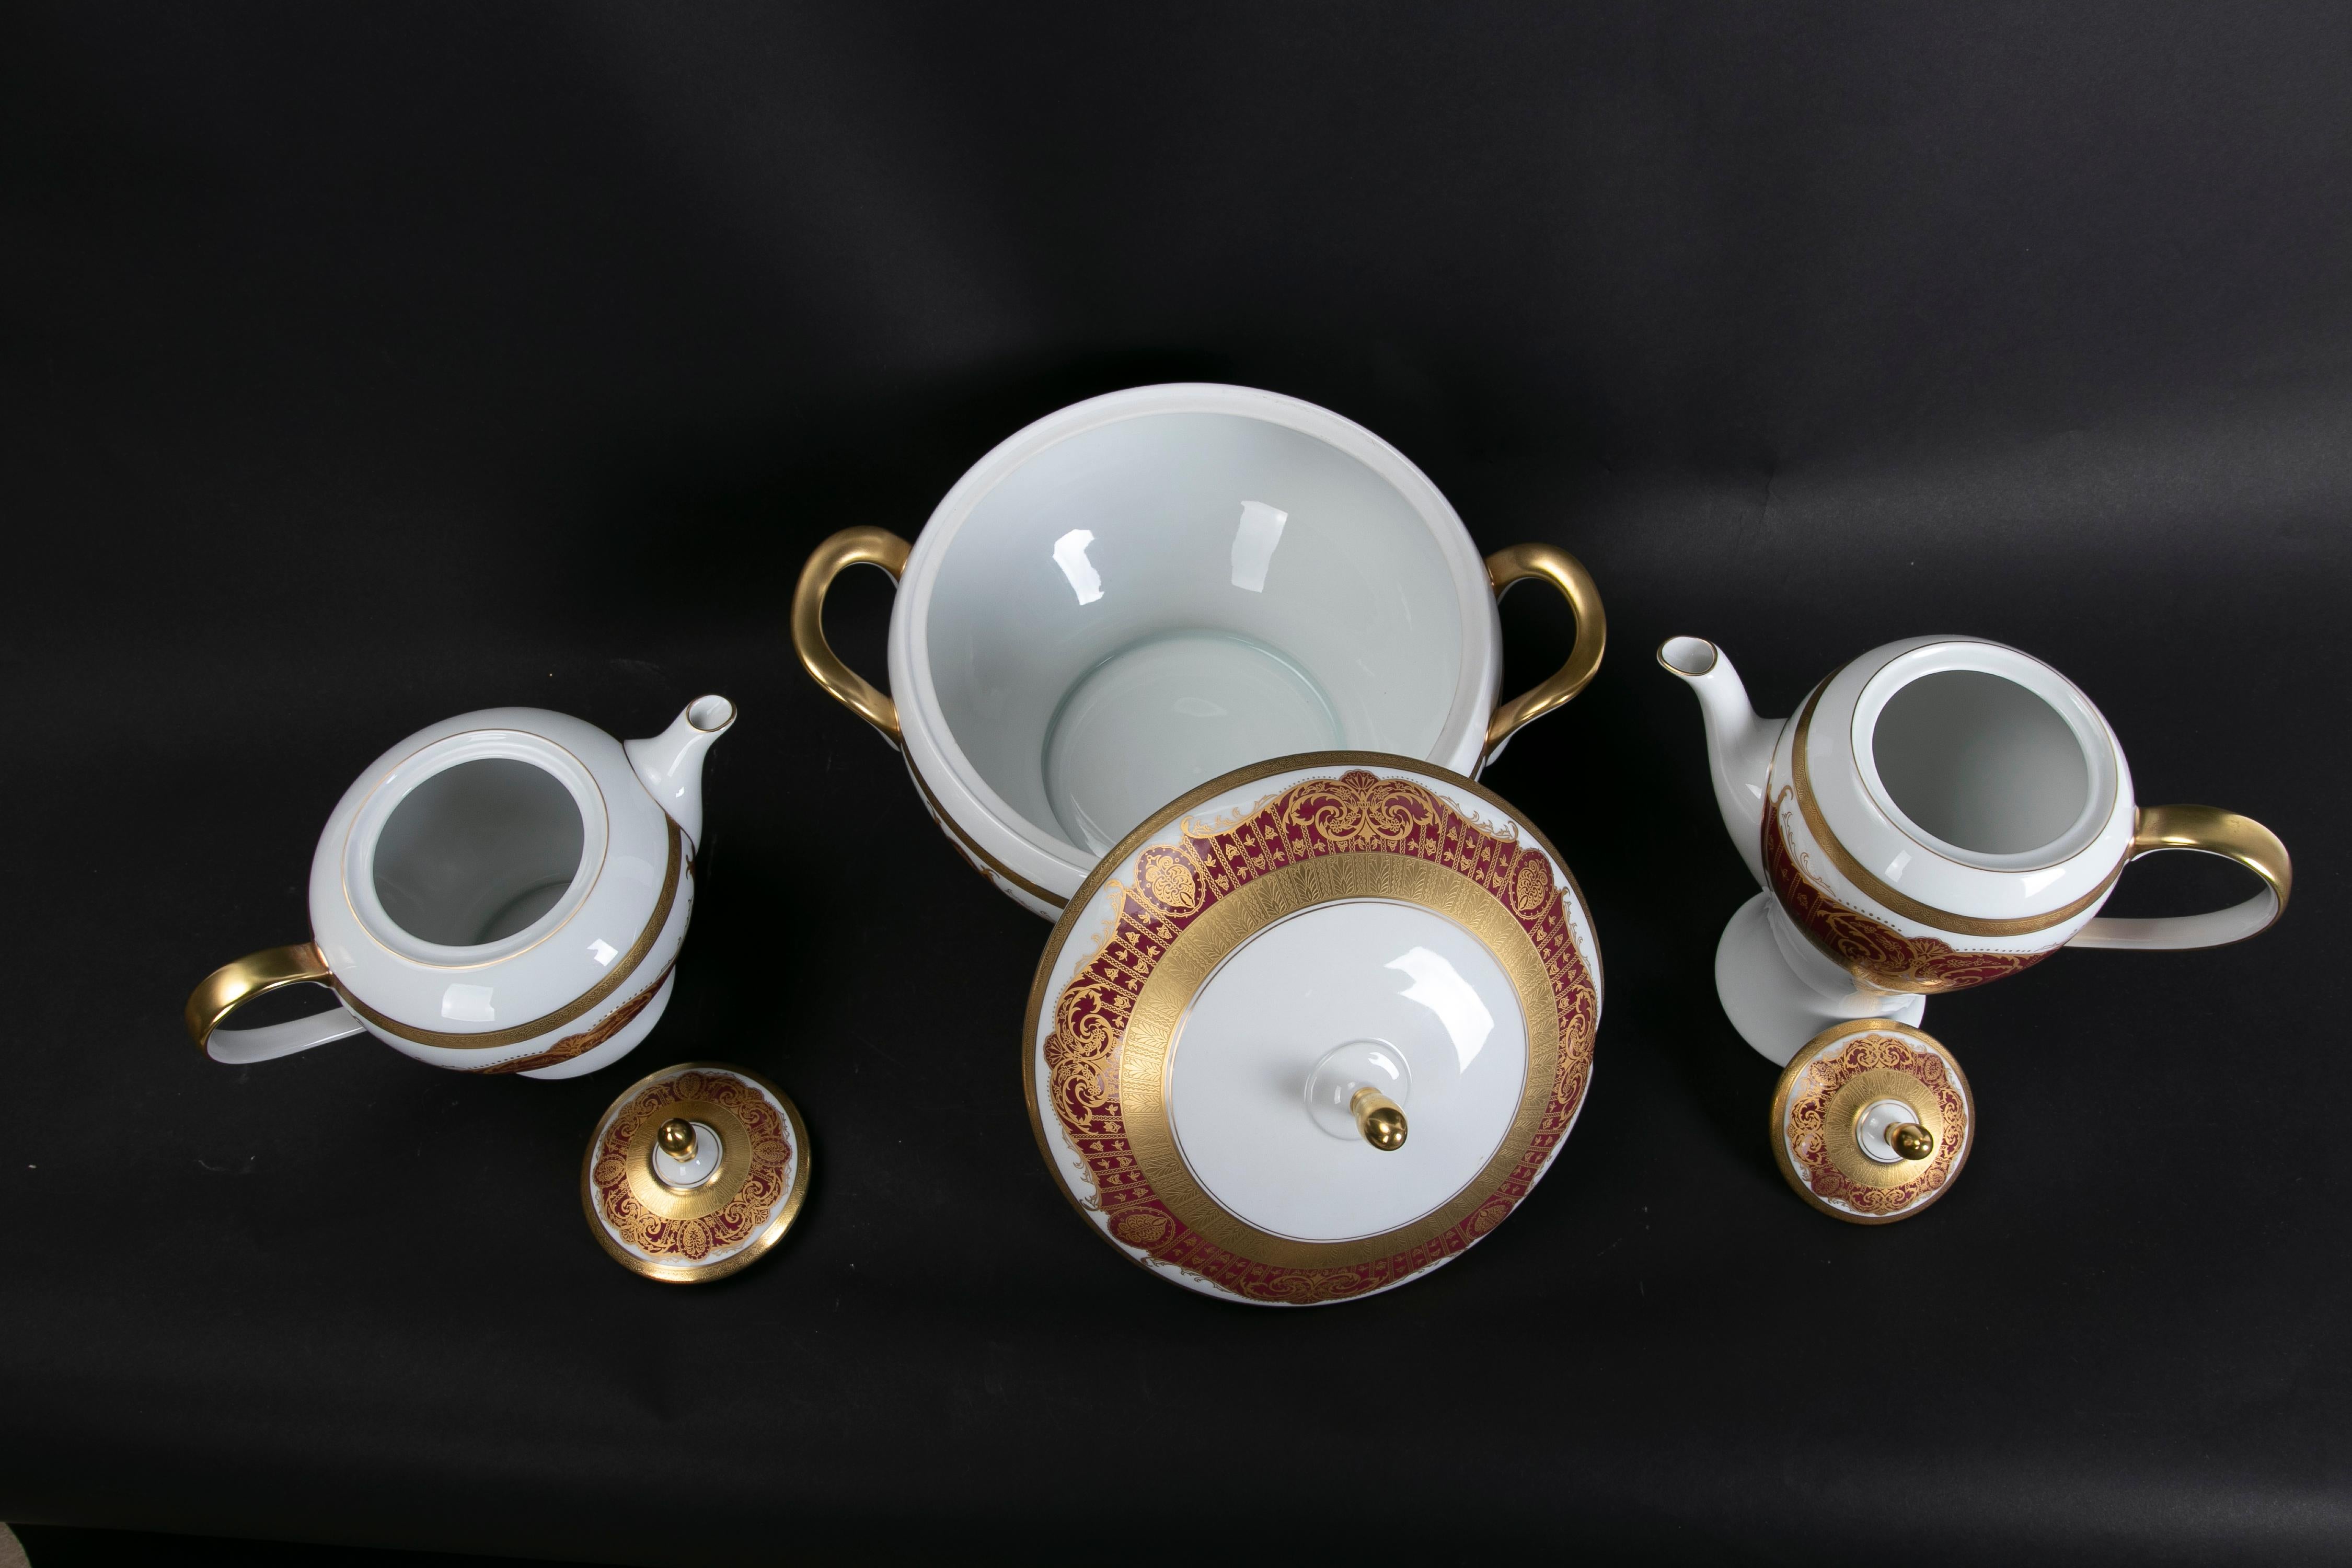 Complete Karlovarsky Porcelain Tableware '229 Pieces' Decorated with Gold For Sale 1